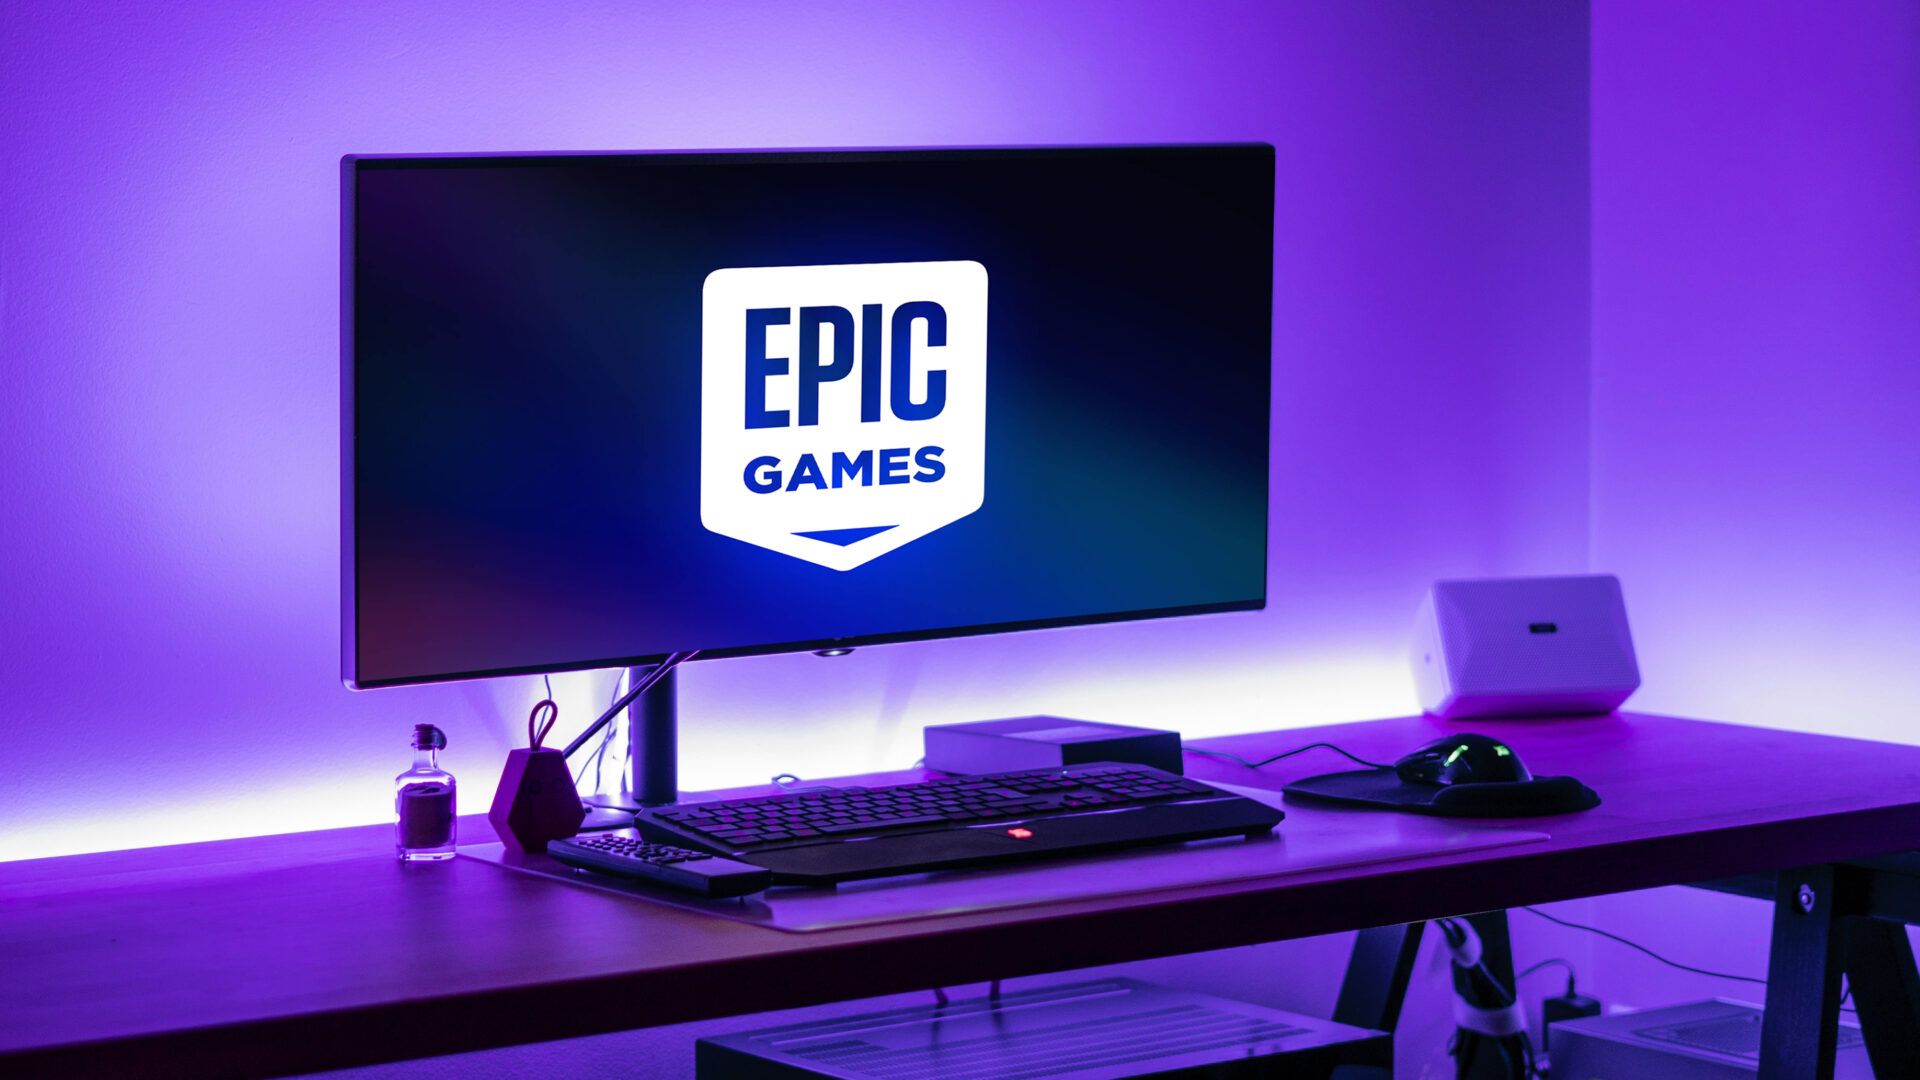 In this article, we are going to be covering how to fix Content Installation Failed Epic Games, so you can continue playing your favorite games without issues.